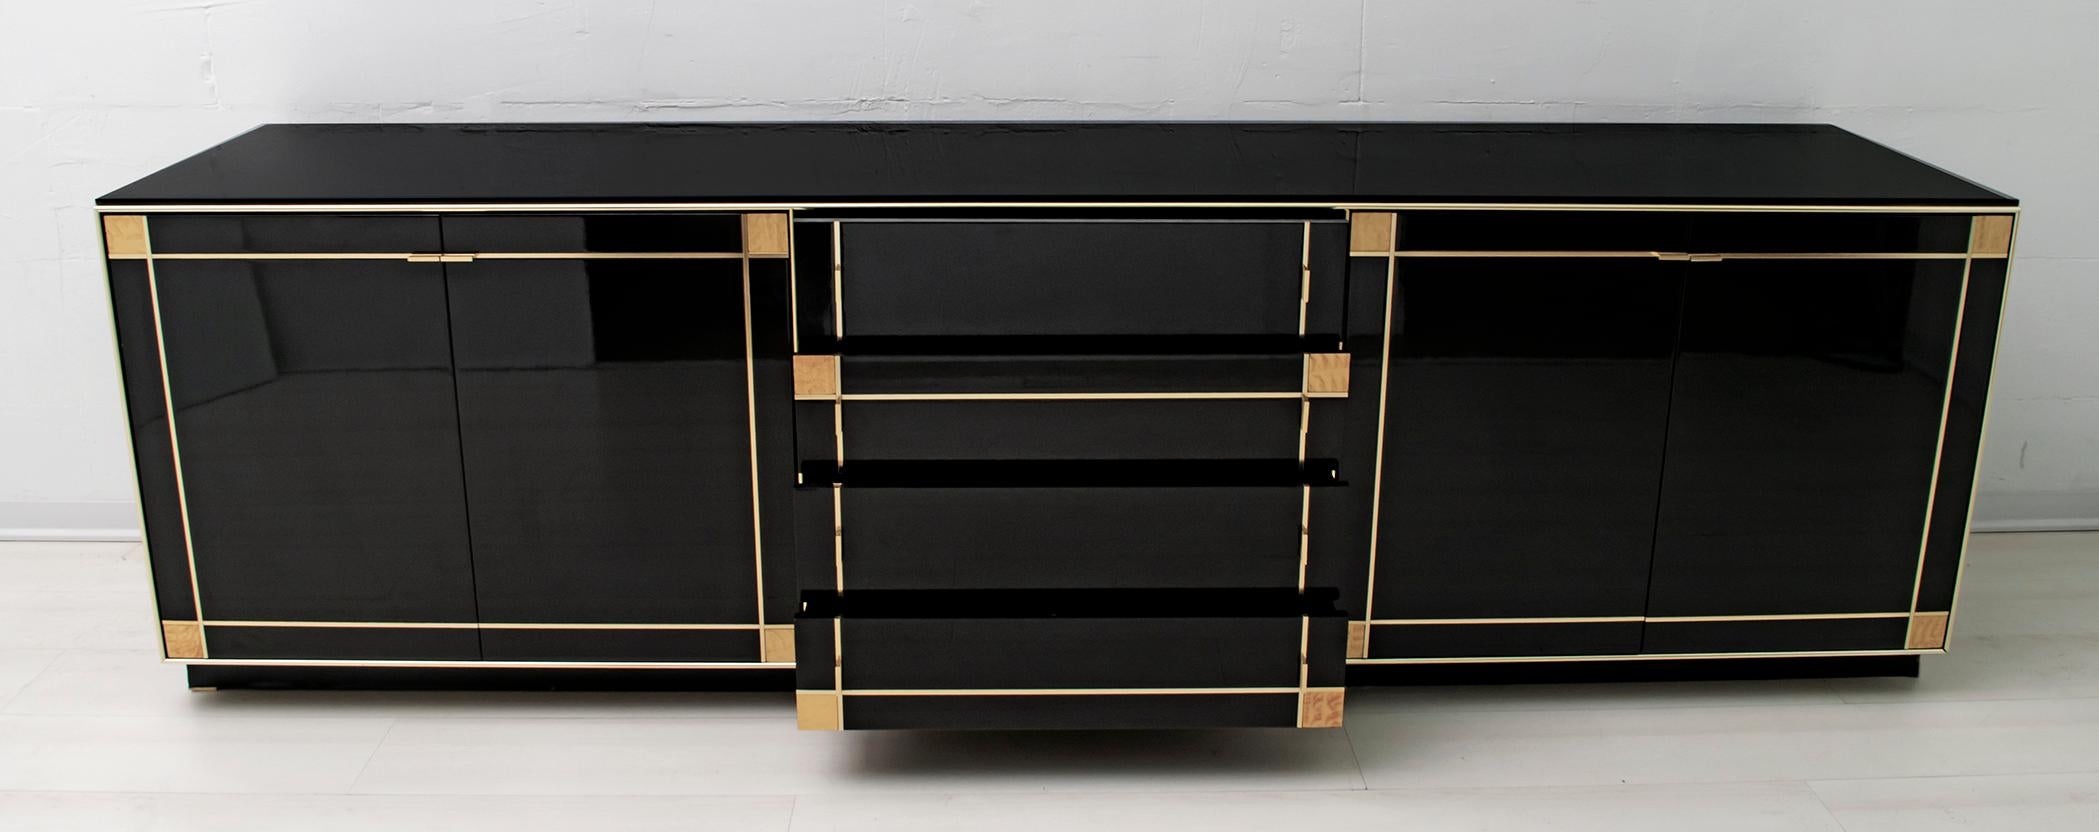 Hollywood Regency Pierre Cardin Black Lacquered Sideboard with Brass Details, 1980s